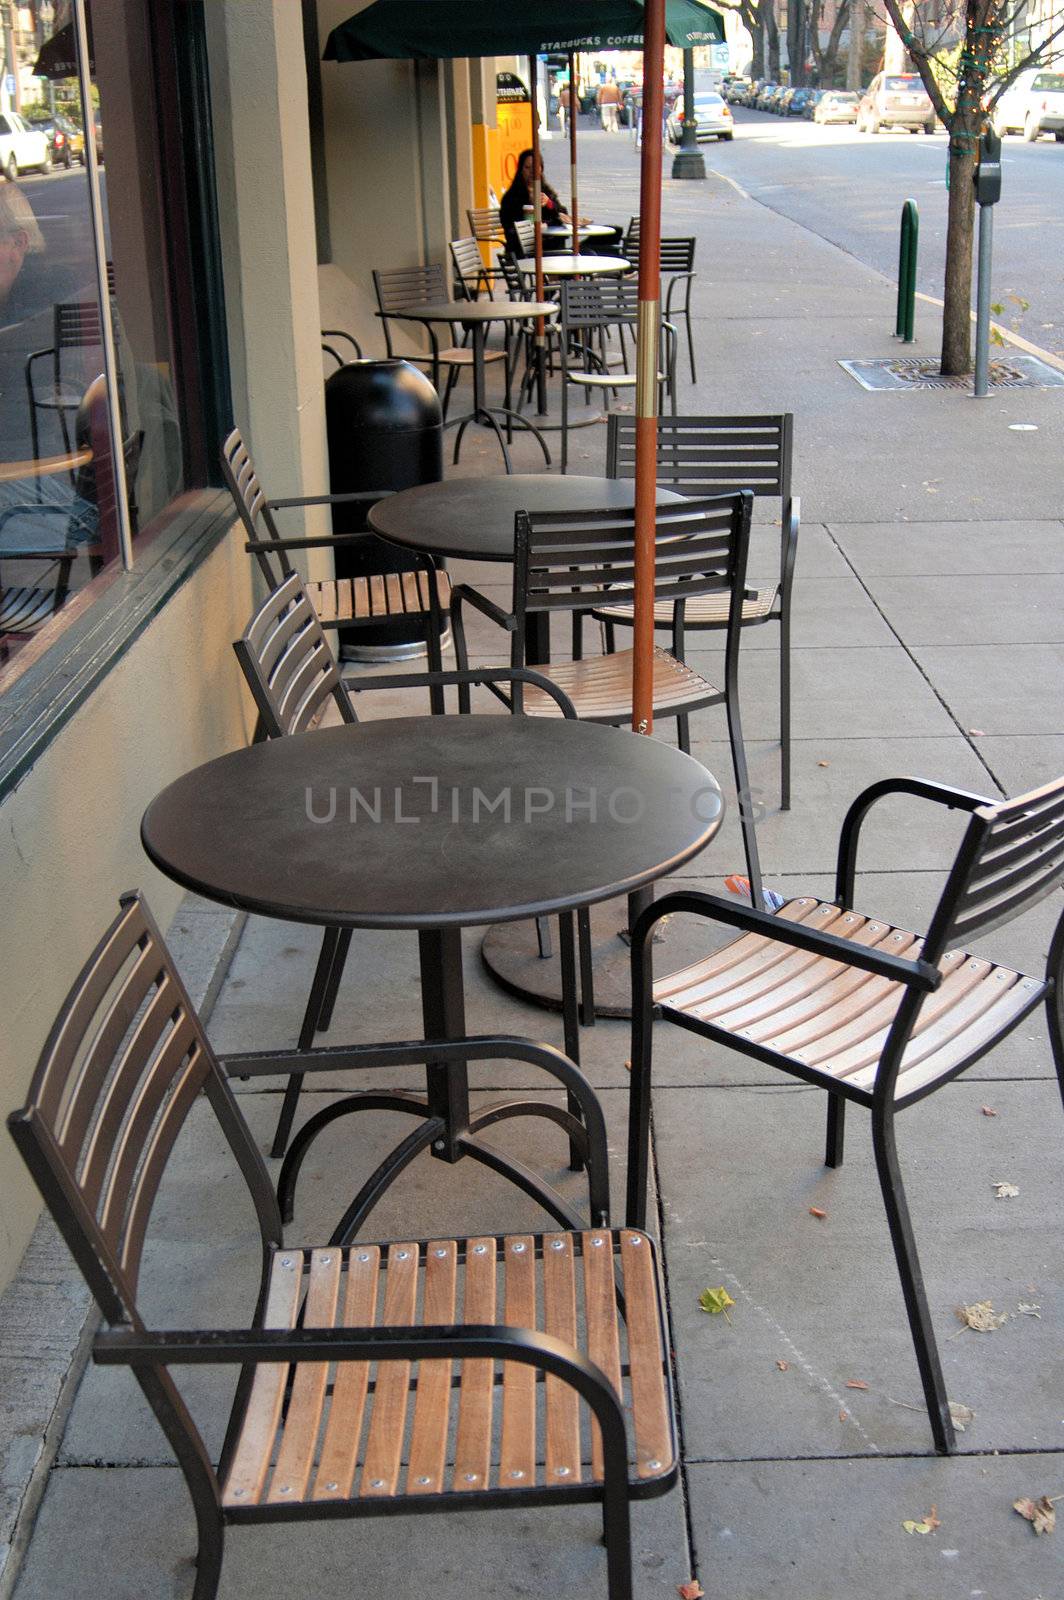 Seats for an outside eating place in Portland Oregon